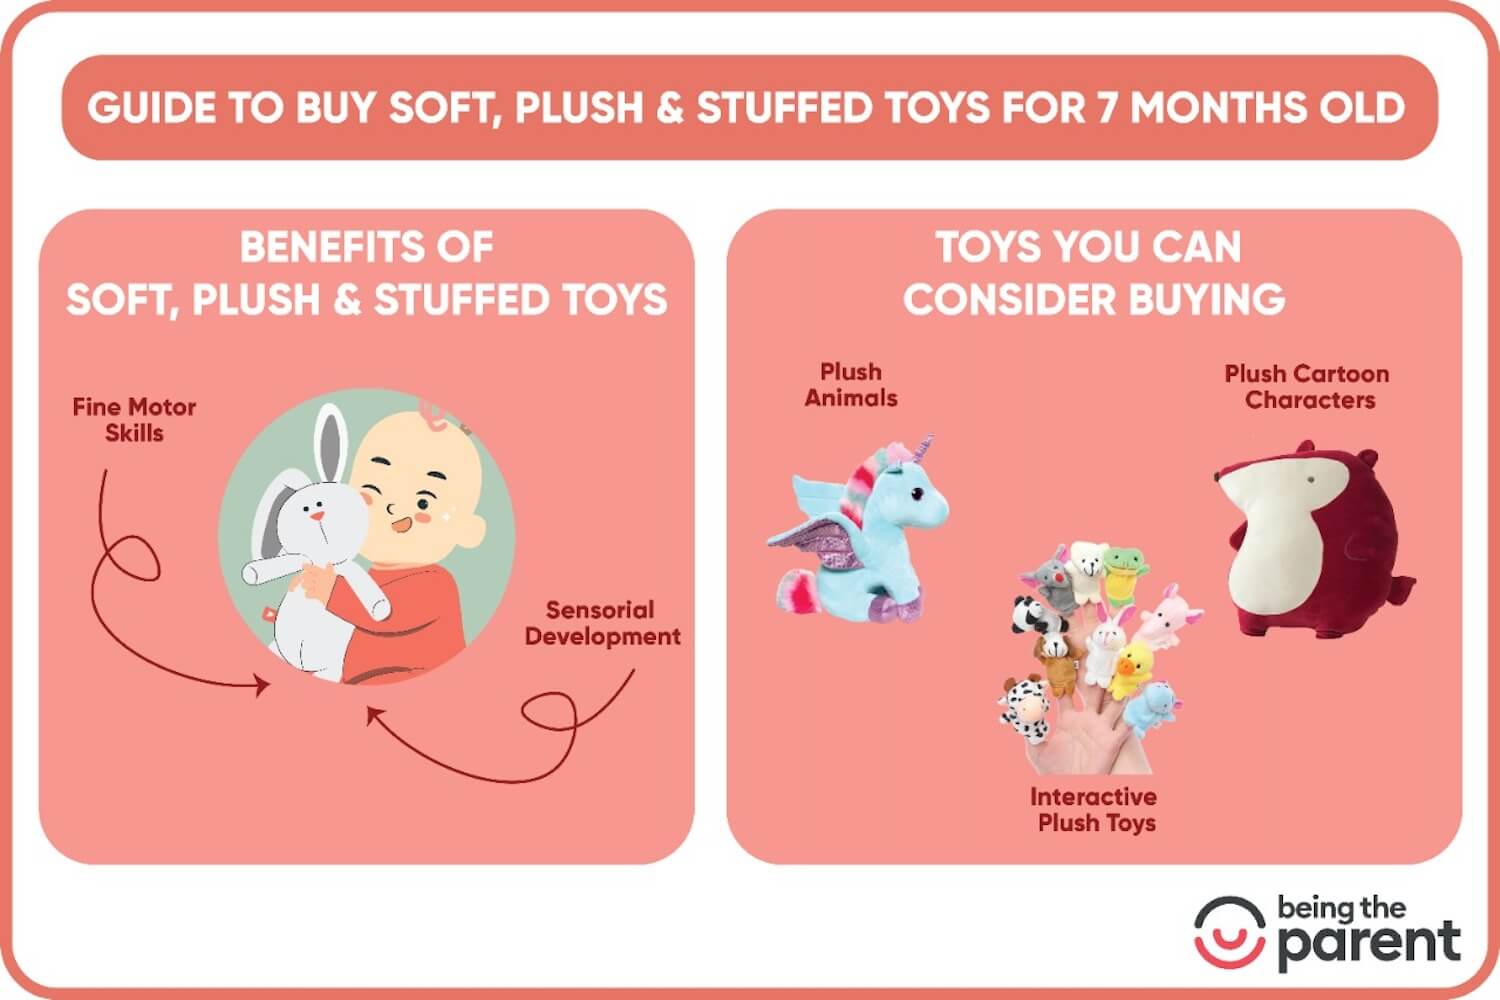 Soft, Plush and Stuffed toys for 7 month old